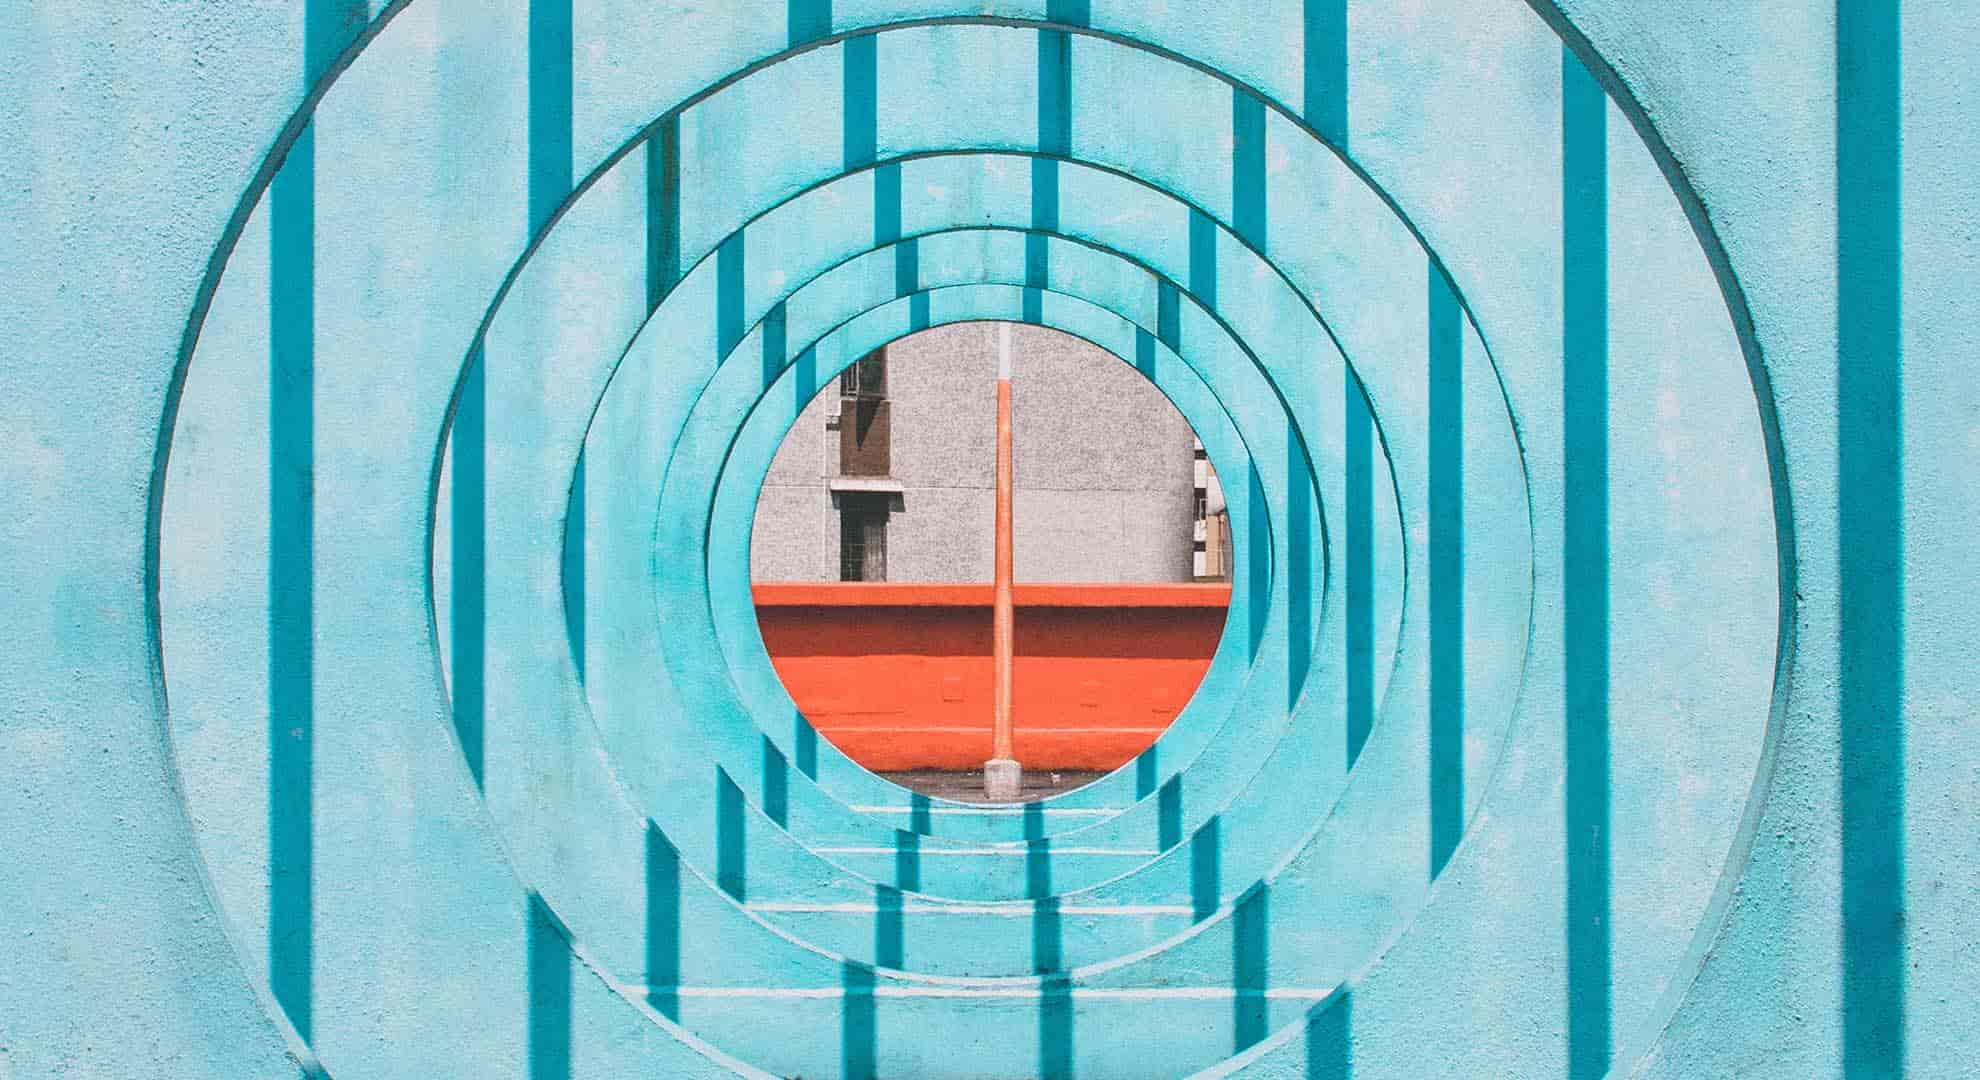 Photo looking through light blue walls with circles cut out